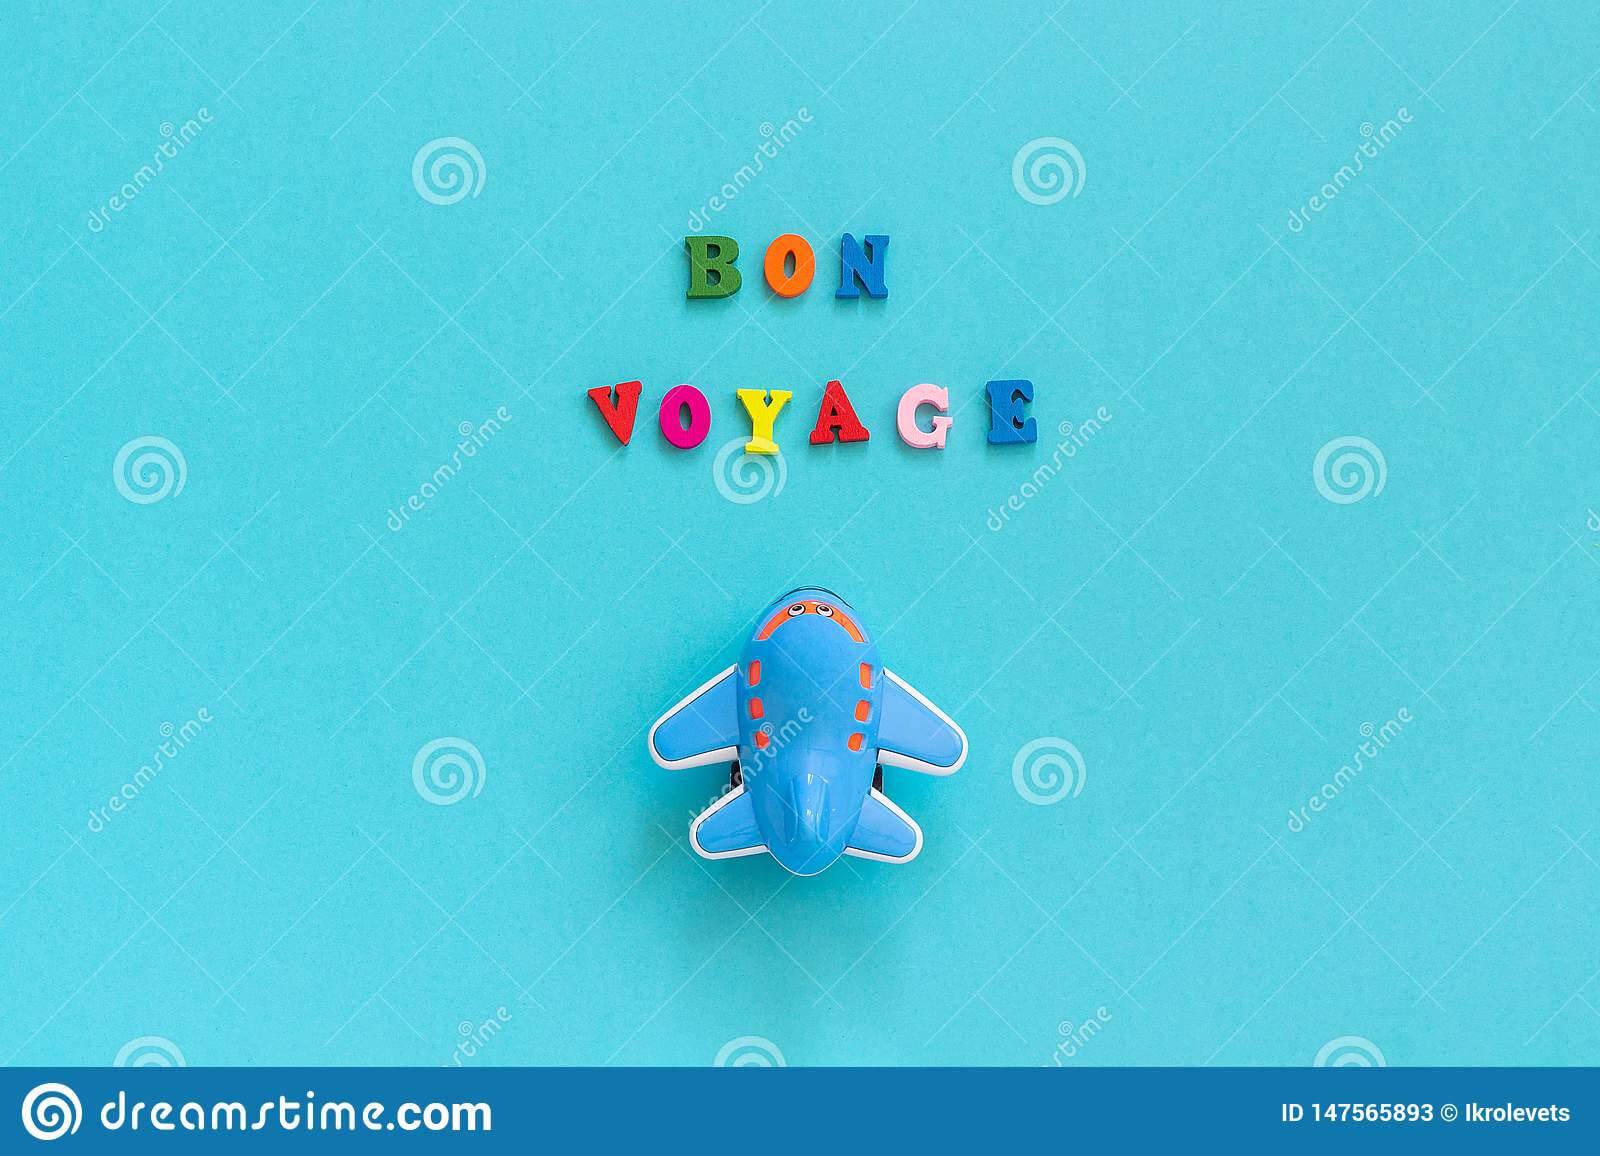 Bon Voyage Colorful Text And Children`s Funny Toy Plane On Regarding Bon Voyage Card Template